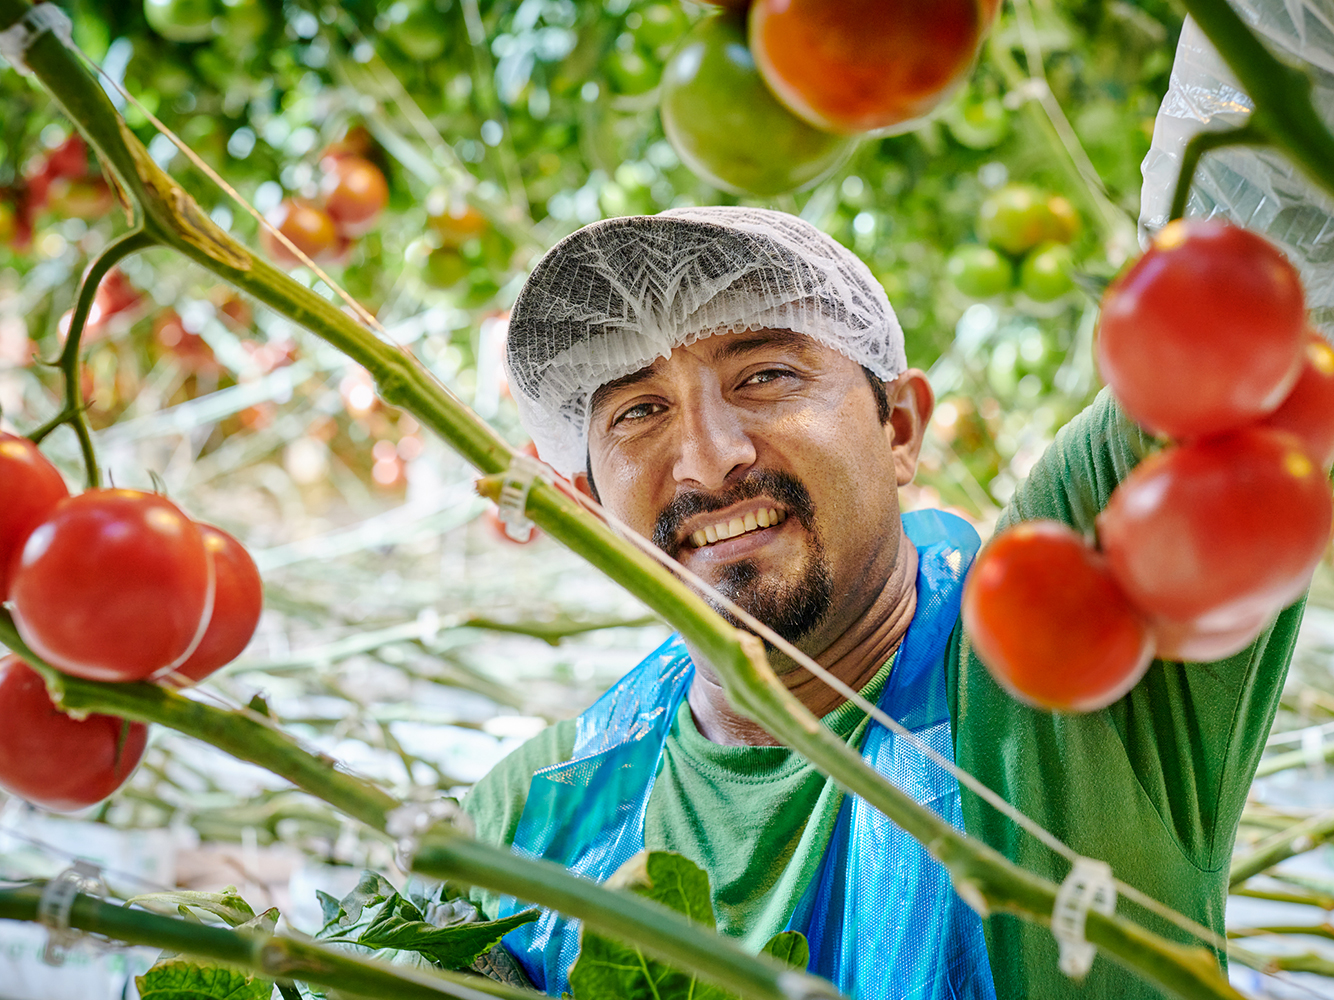 worker with tomatoes